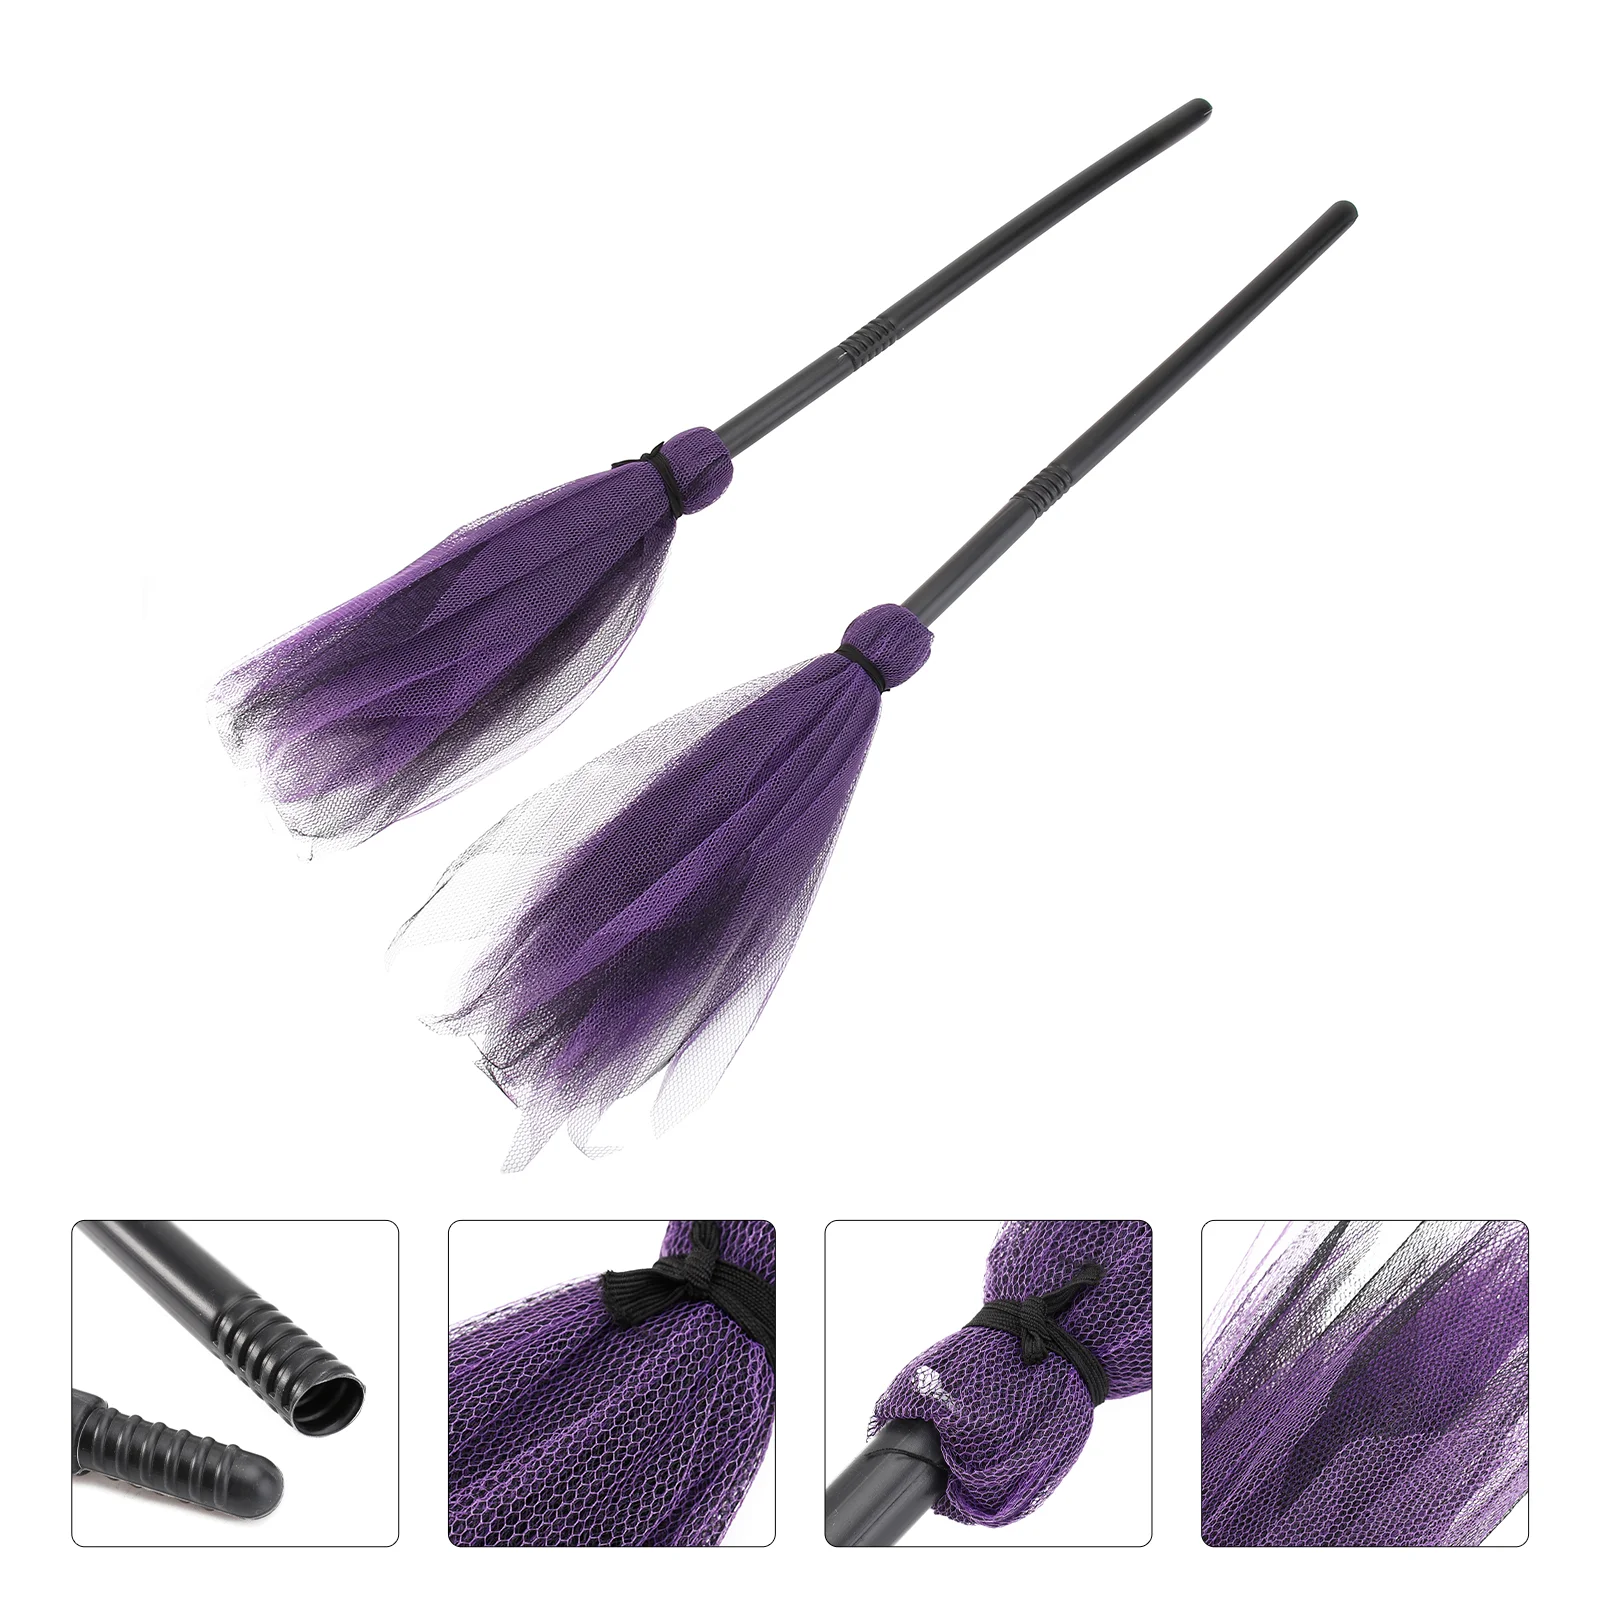 

Witches Broom, Creative Broom Witch Broomstick Witch Prop Accessory, Wizard Flying Broom Party Favors for Teens